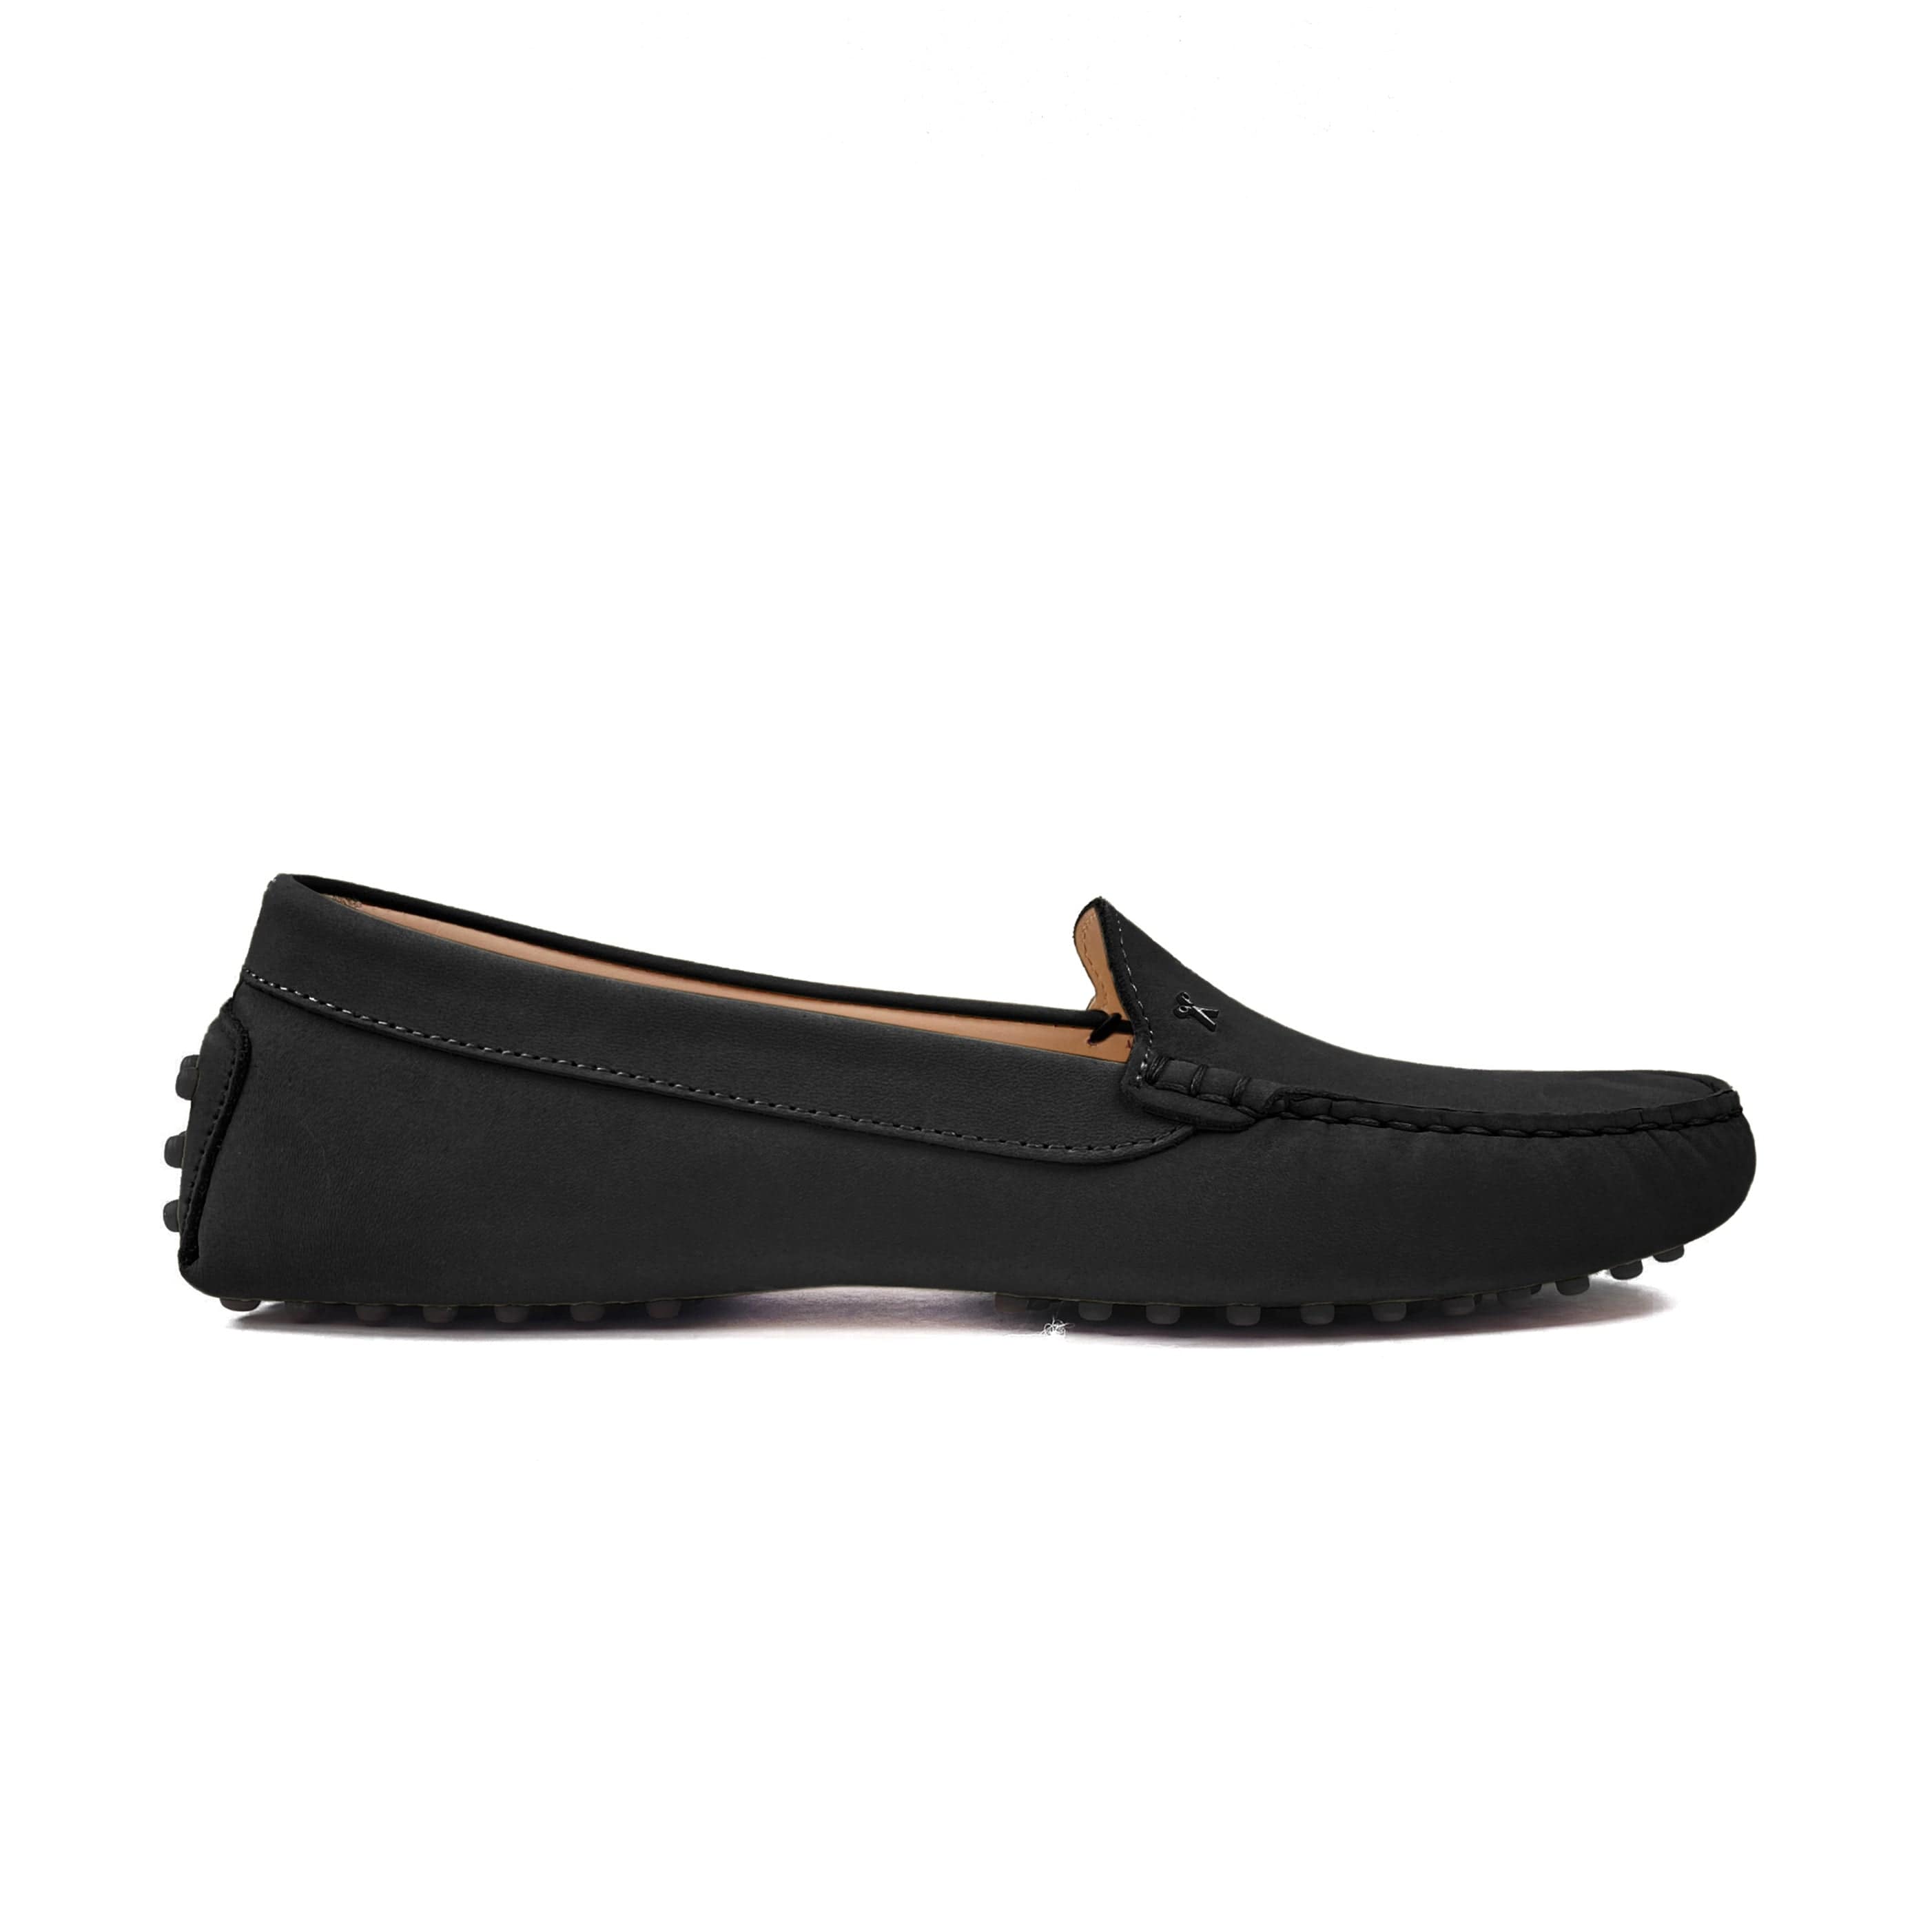 Driving shoe or moccasin in black italian nubuck leather with tan coloured calfskin lining. It has the iconic scissor on the right side of the vamp showing from the side on a white background